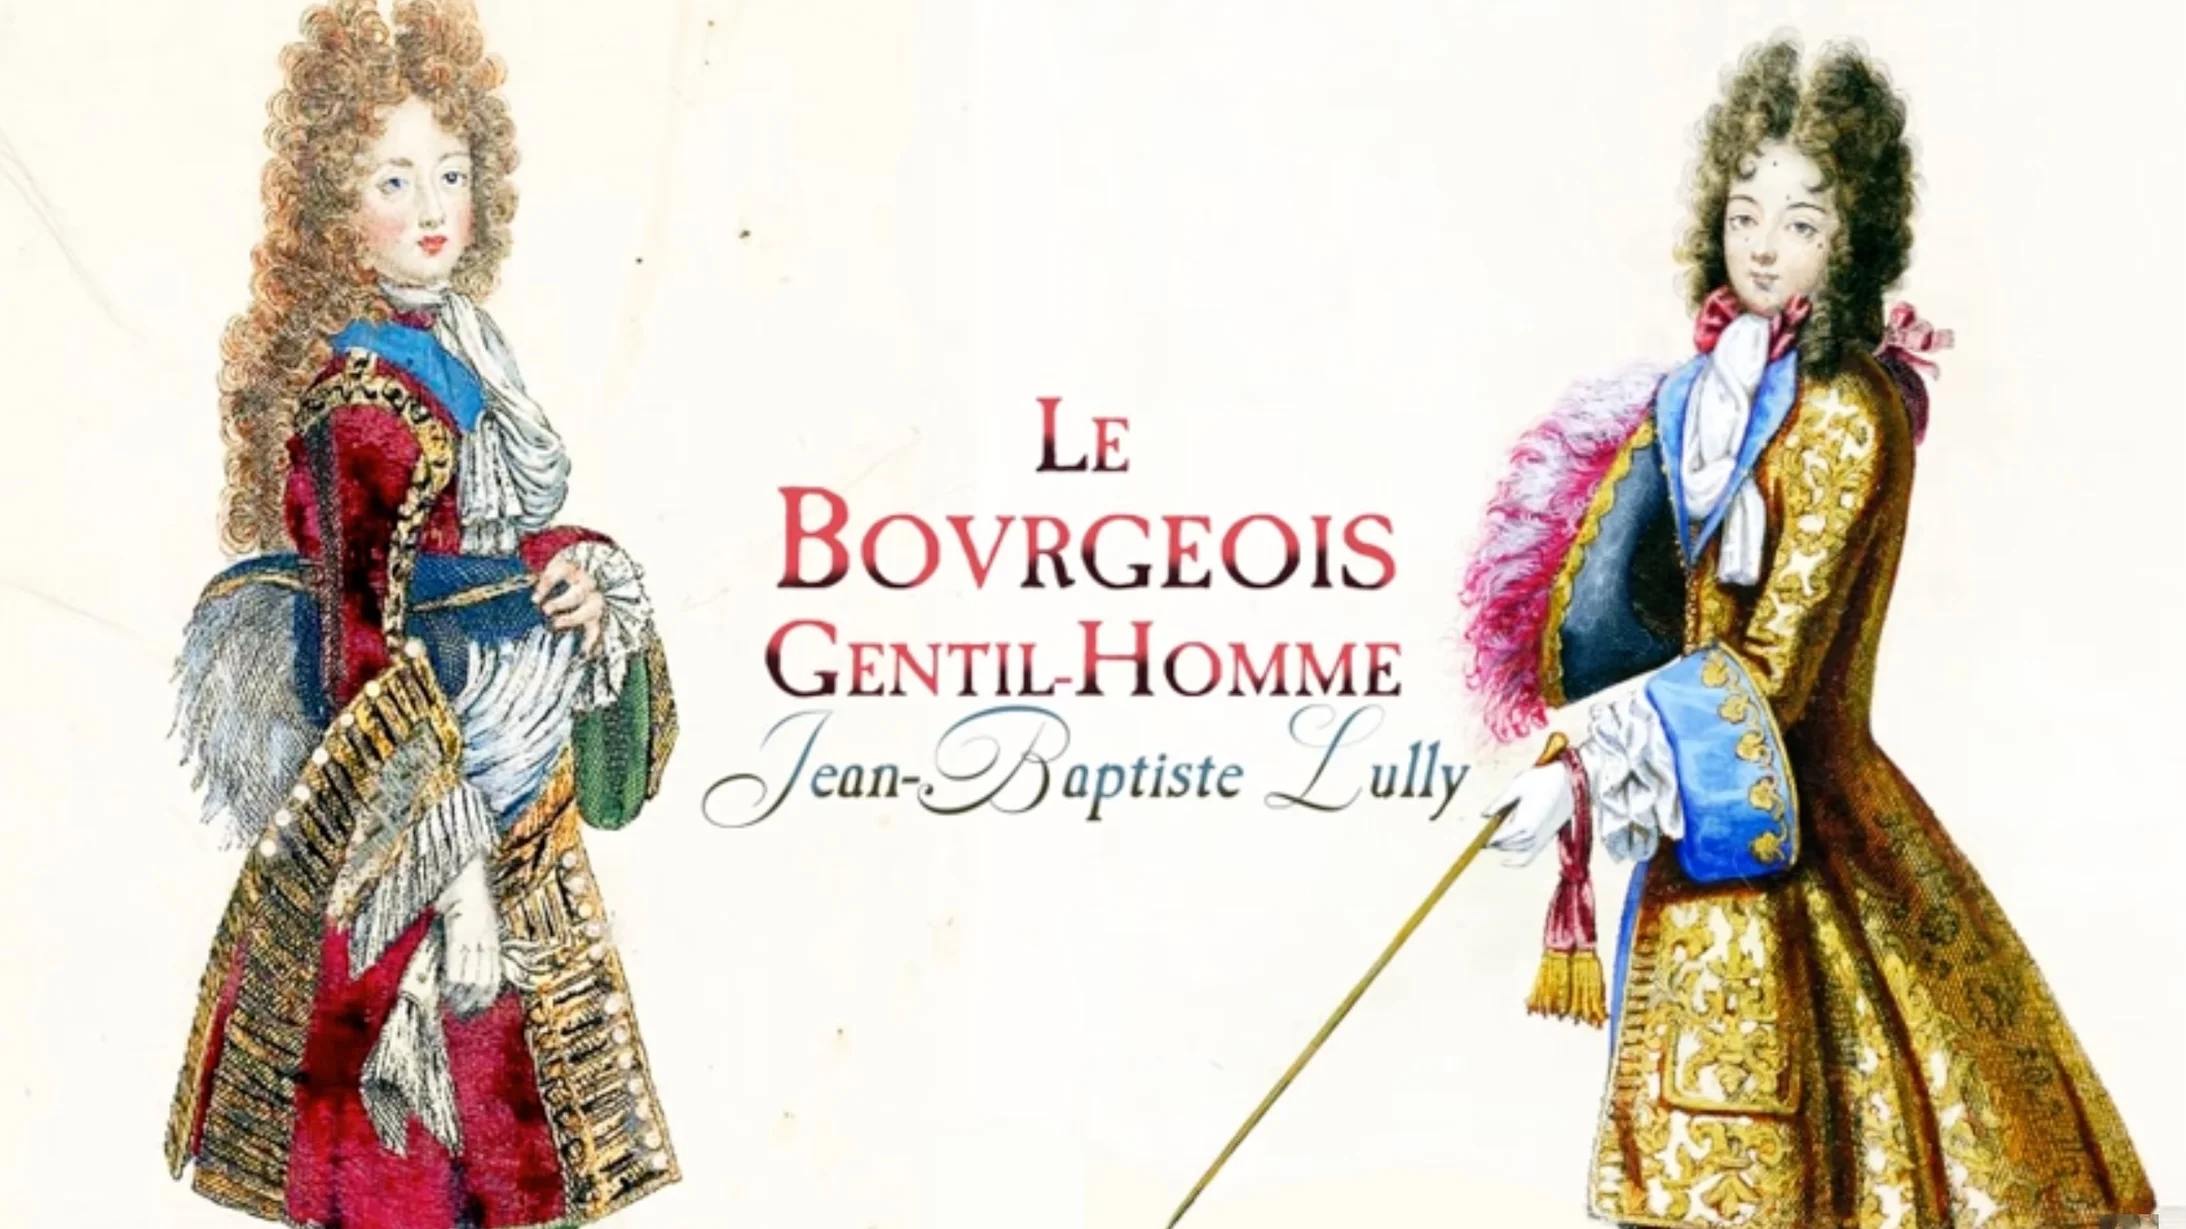 Lully Bourgeois gentilhomme